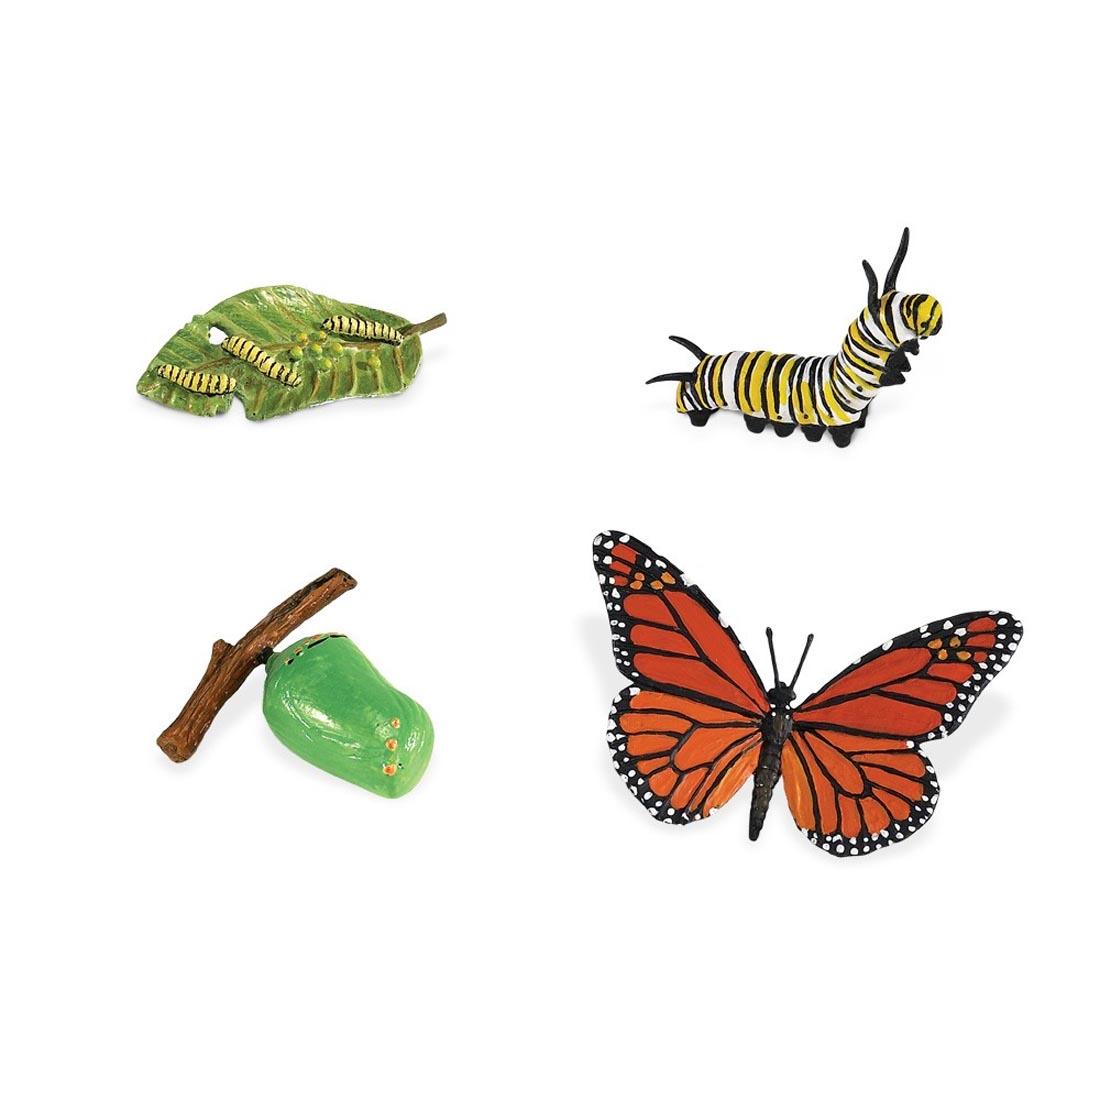 Four figurines to show the Life Cycle of a Monarch Butterfly